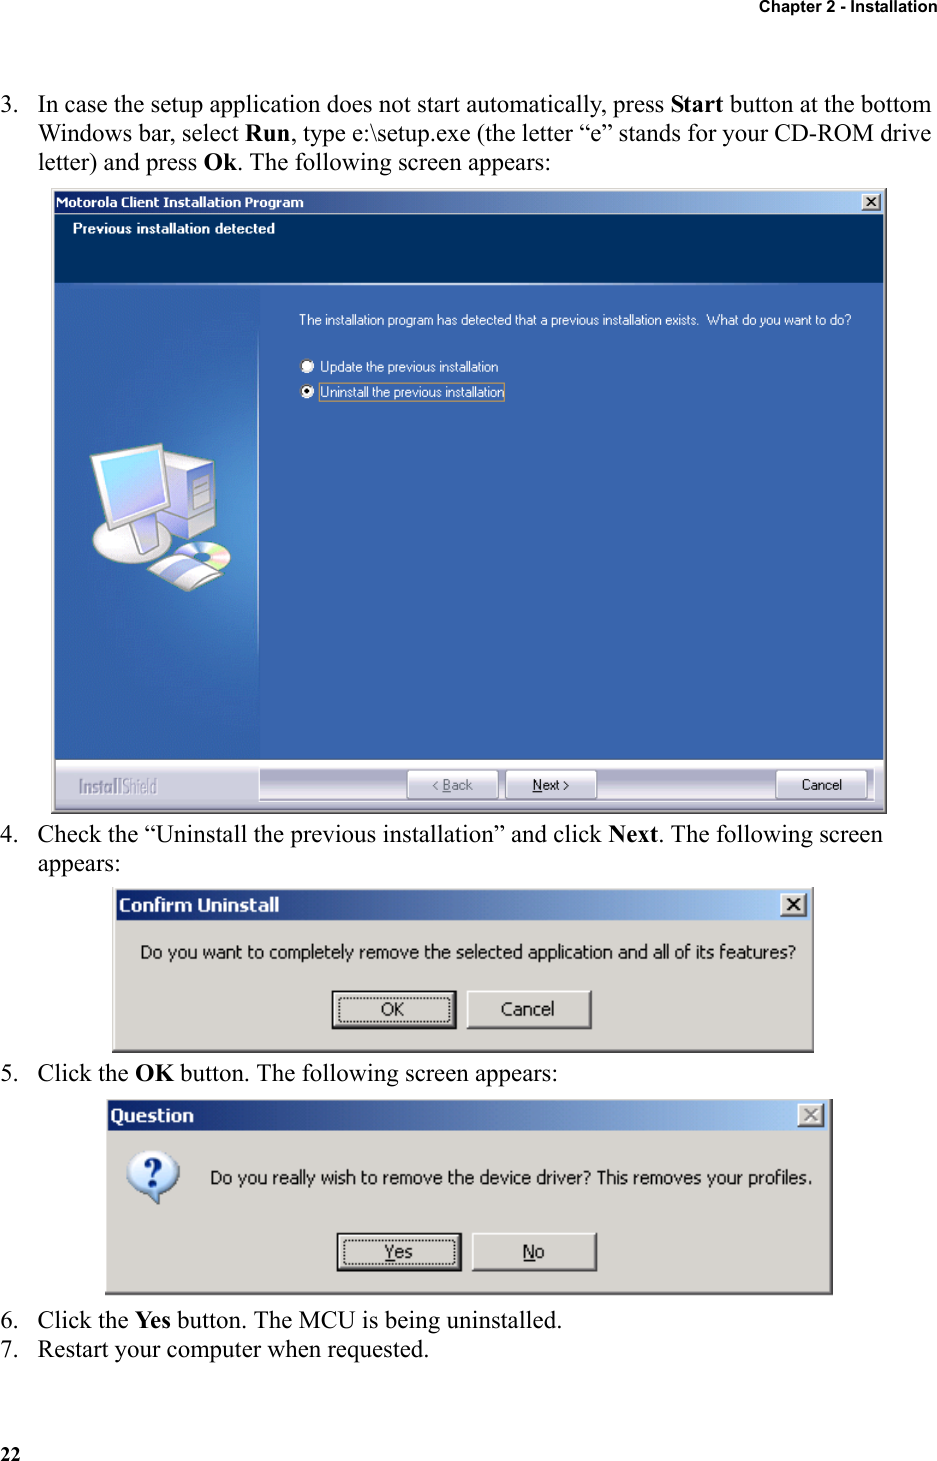 Chapter 2 - Installation223. In case the setup application does not start automatically, press Start button at the bottom Windows bar, select Run, type e:\setup.exe (the letter “e” stands for your CD-ROM drive letter) and press Ok. The following screen appears:4. Check the “Uninstall the previous installation” and click Next. The following screen appears:5. Click the OK button. The following screen appears:6. Click the Ye s  button. The MCU is being uninstalled.7. Restart your computer when requested.